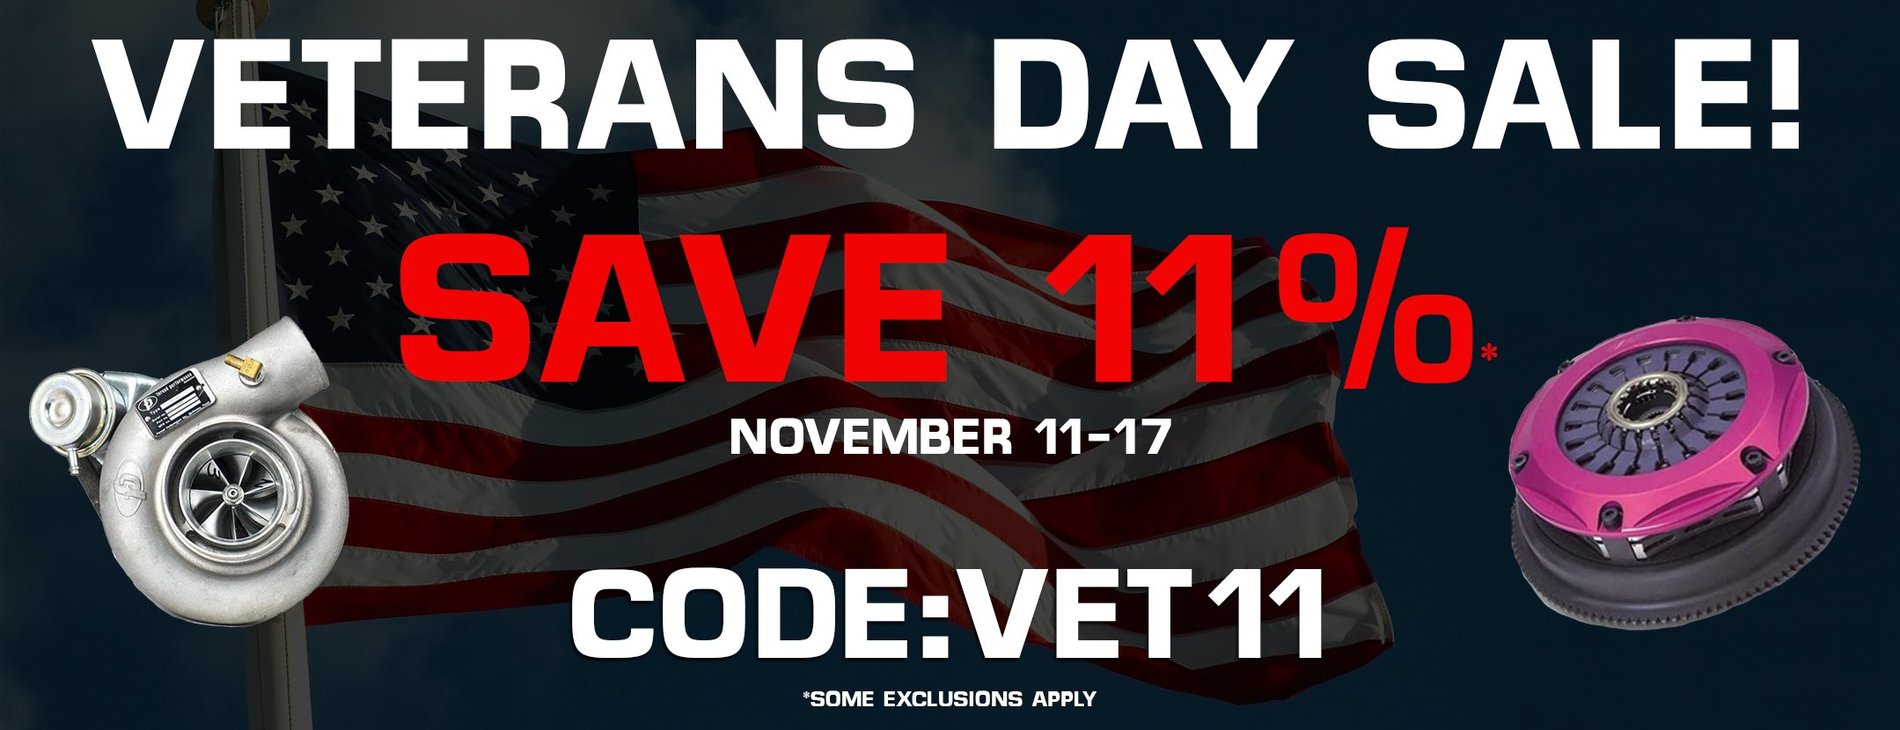 Honda Civic 10th gen Thank You to Our Veterans! 11% OFF Sale at MAPerformance Specials_Veterans_Day